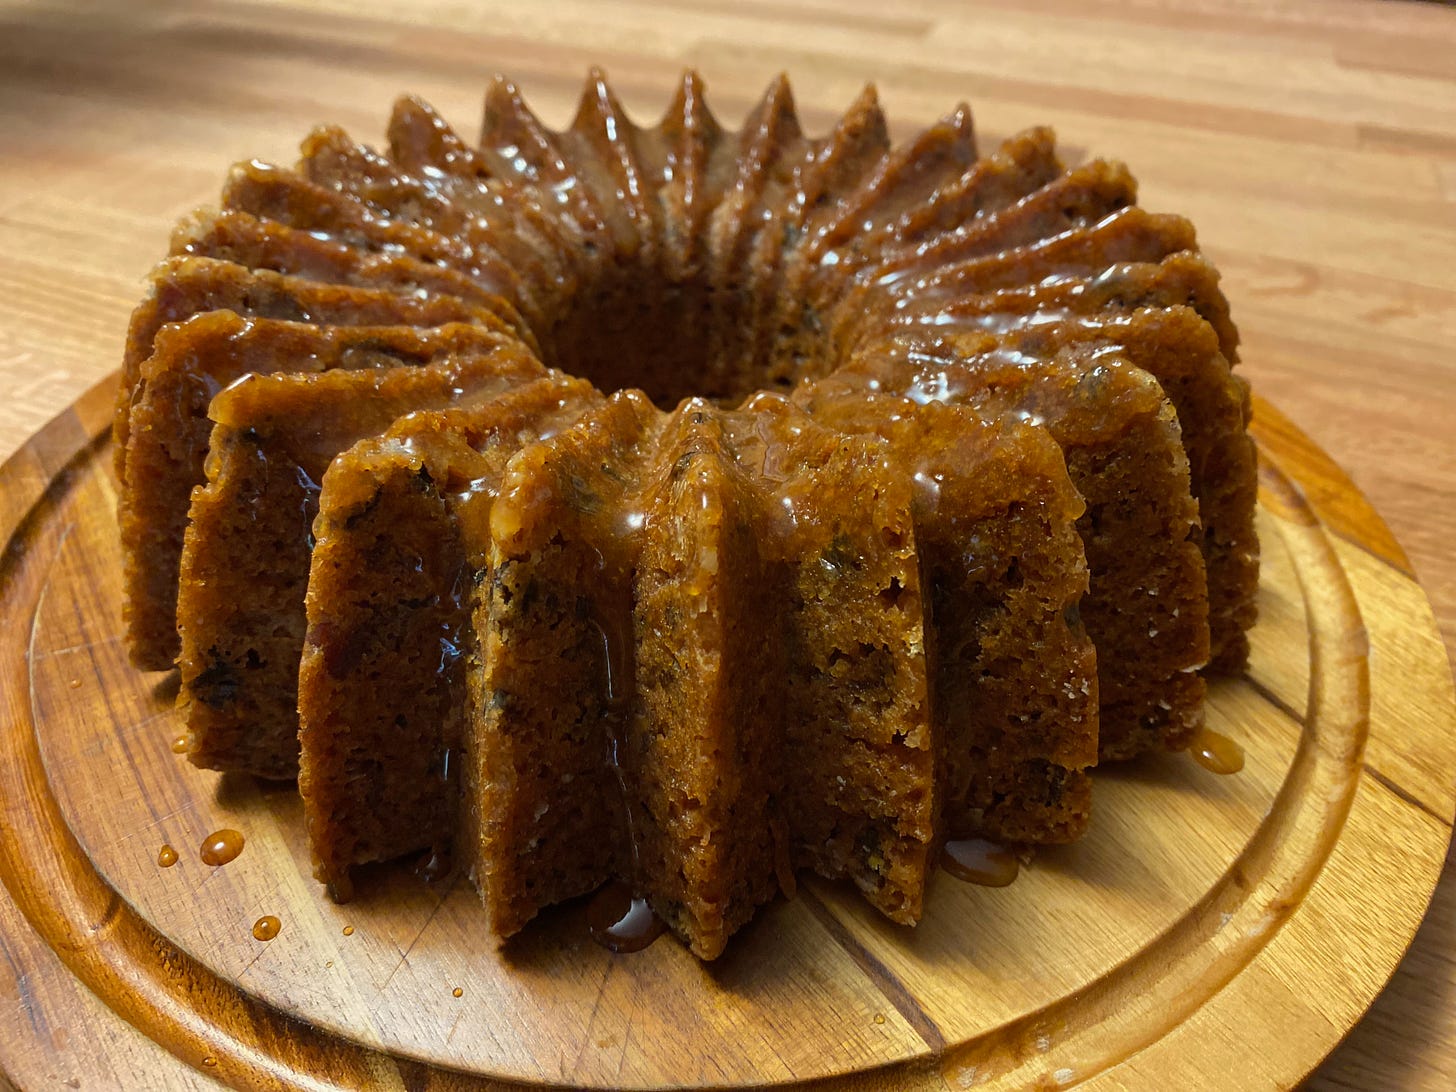 Close-up of a golden brown tea cake sitting on a wooden plater. It’s a round cake with a hole in the center, with pronounced ridges from the patterned bundt pan it was baked in. A glaze shimmers on top. 